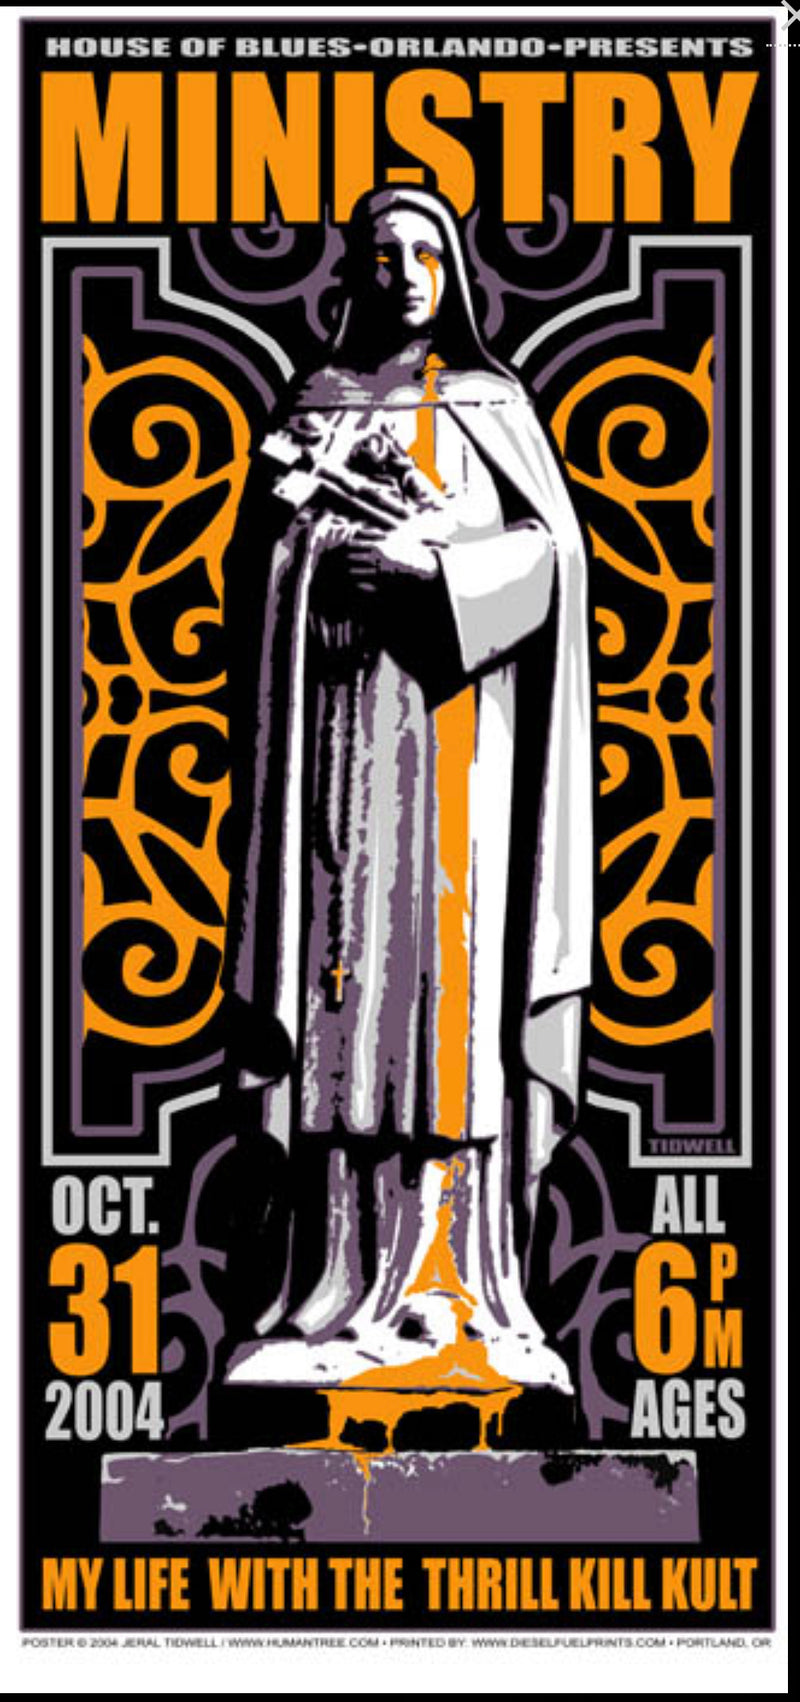 Ministry House of Blues Gig Poster